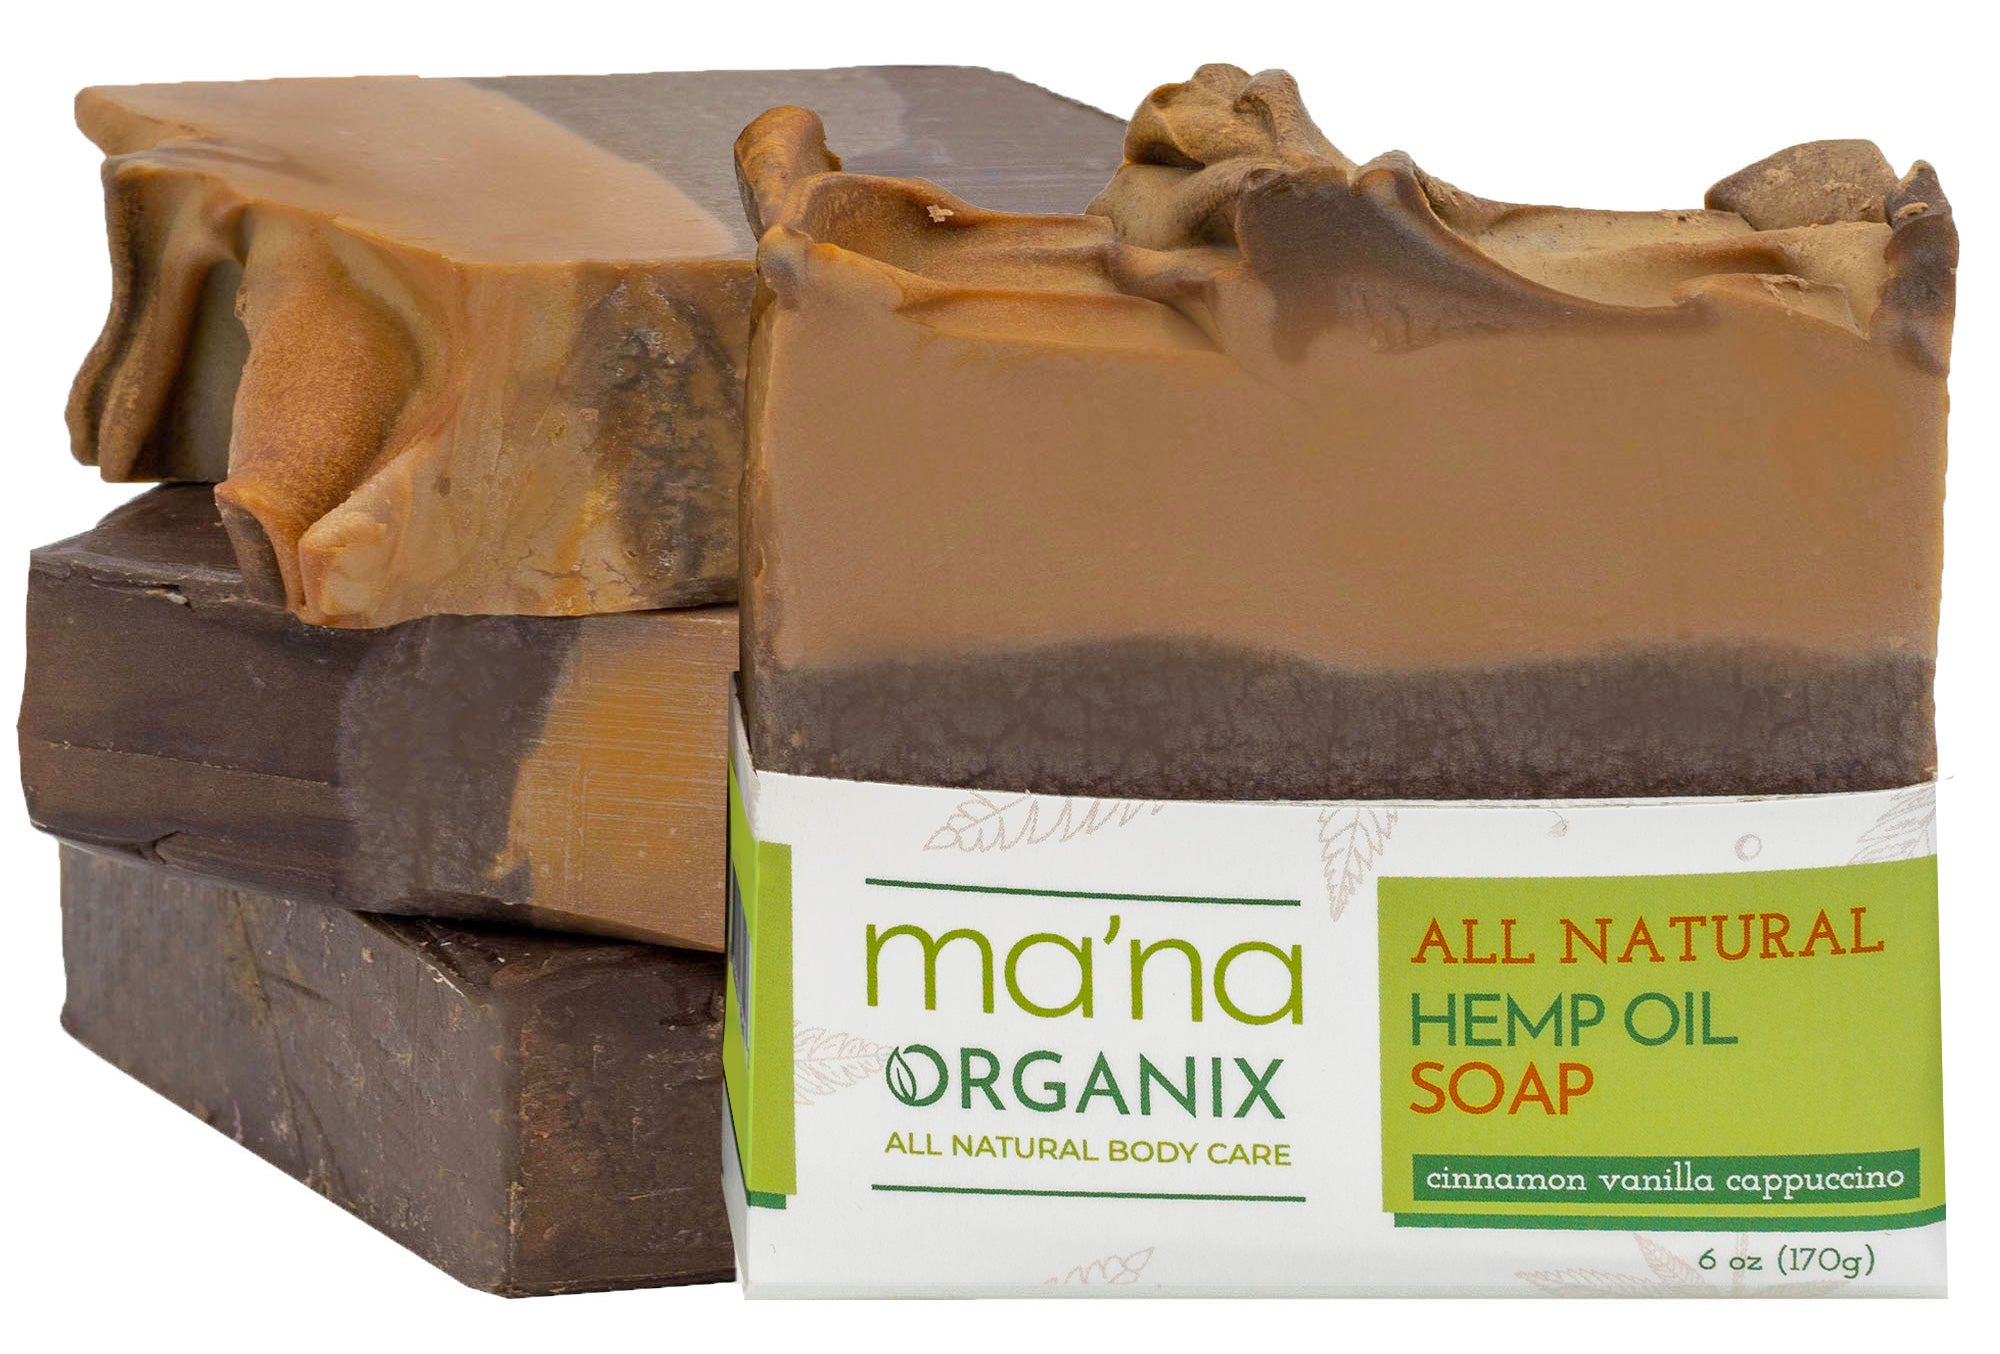 All Natural Hemp Oil and Cinnamon Vanilla Capuccino Soap Bar with Ecofriendly and Biodegradable Packaging